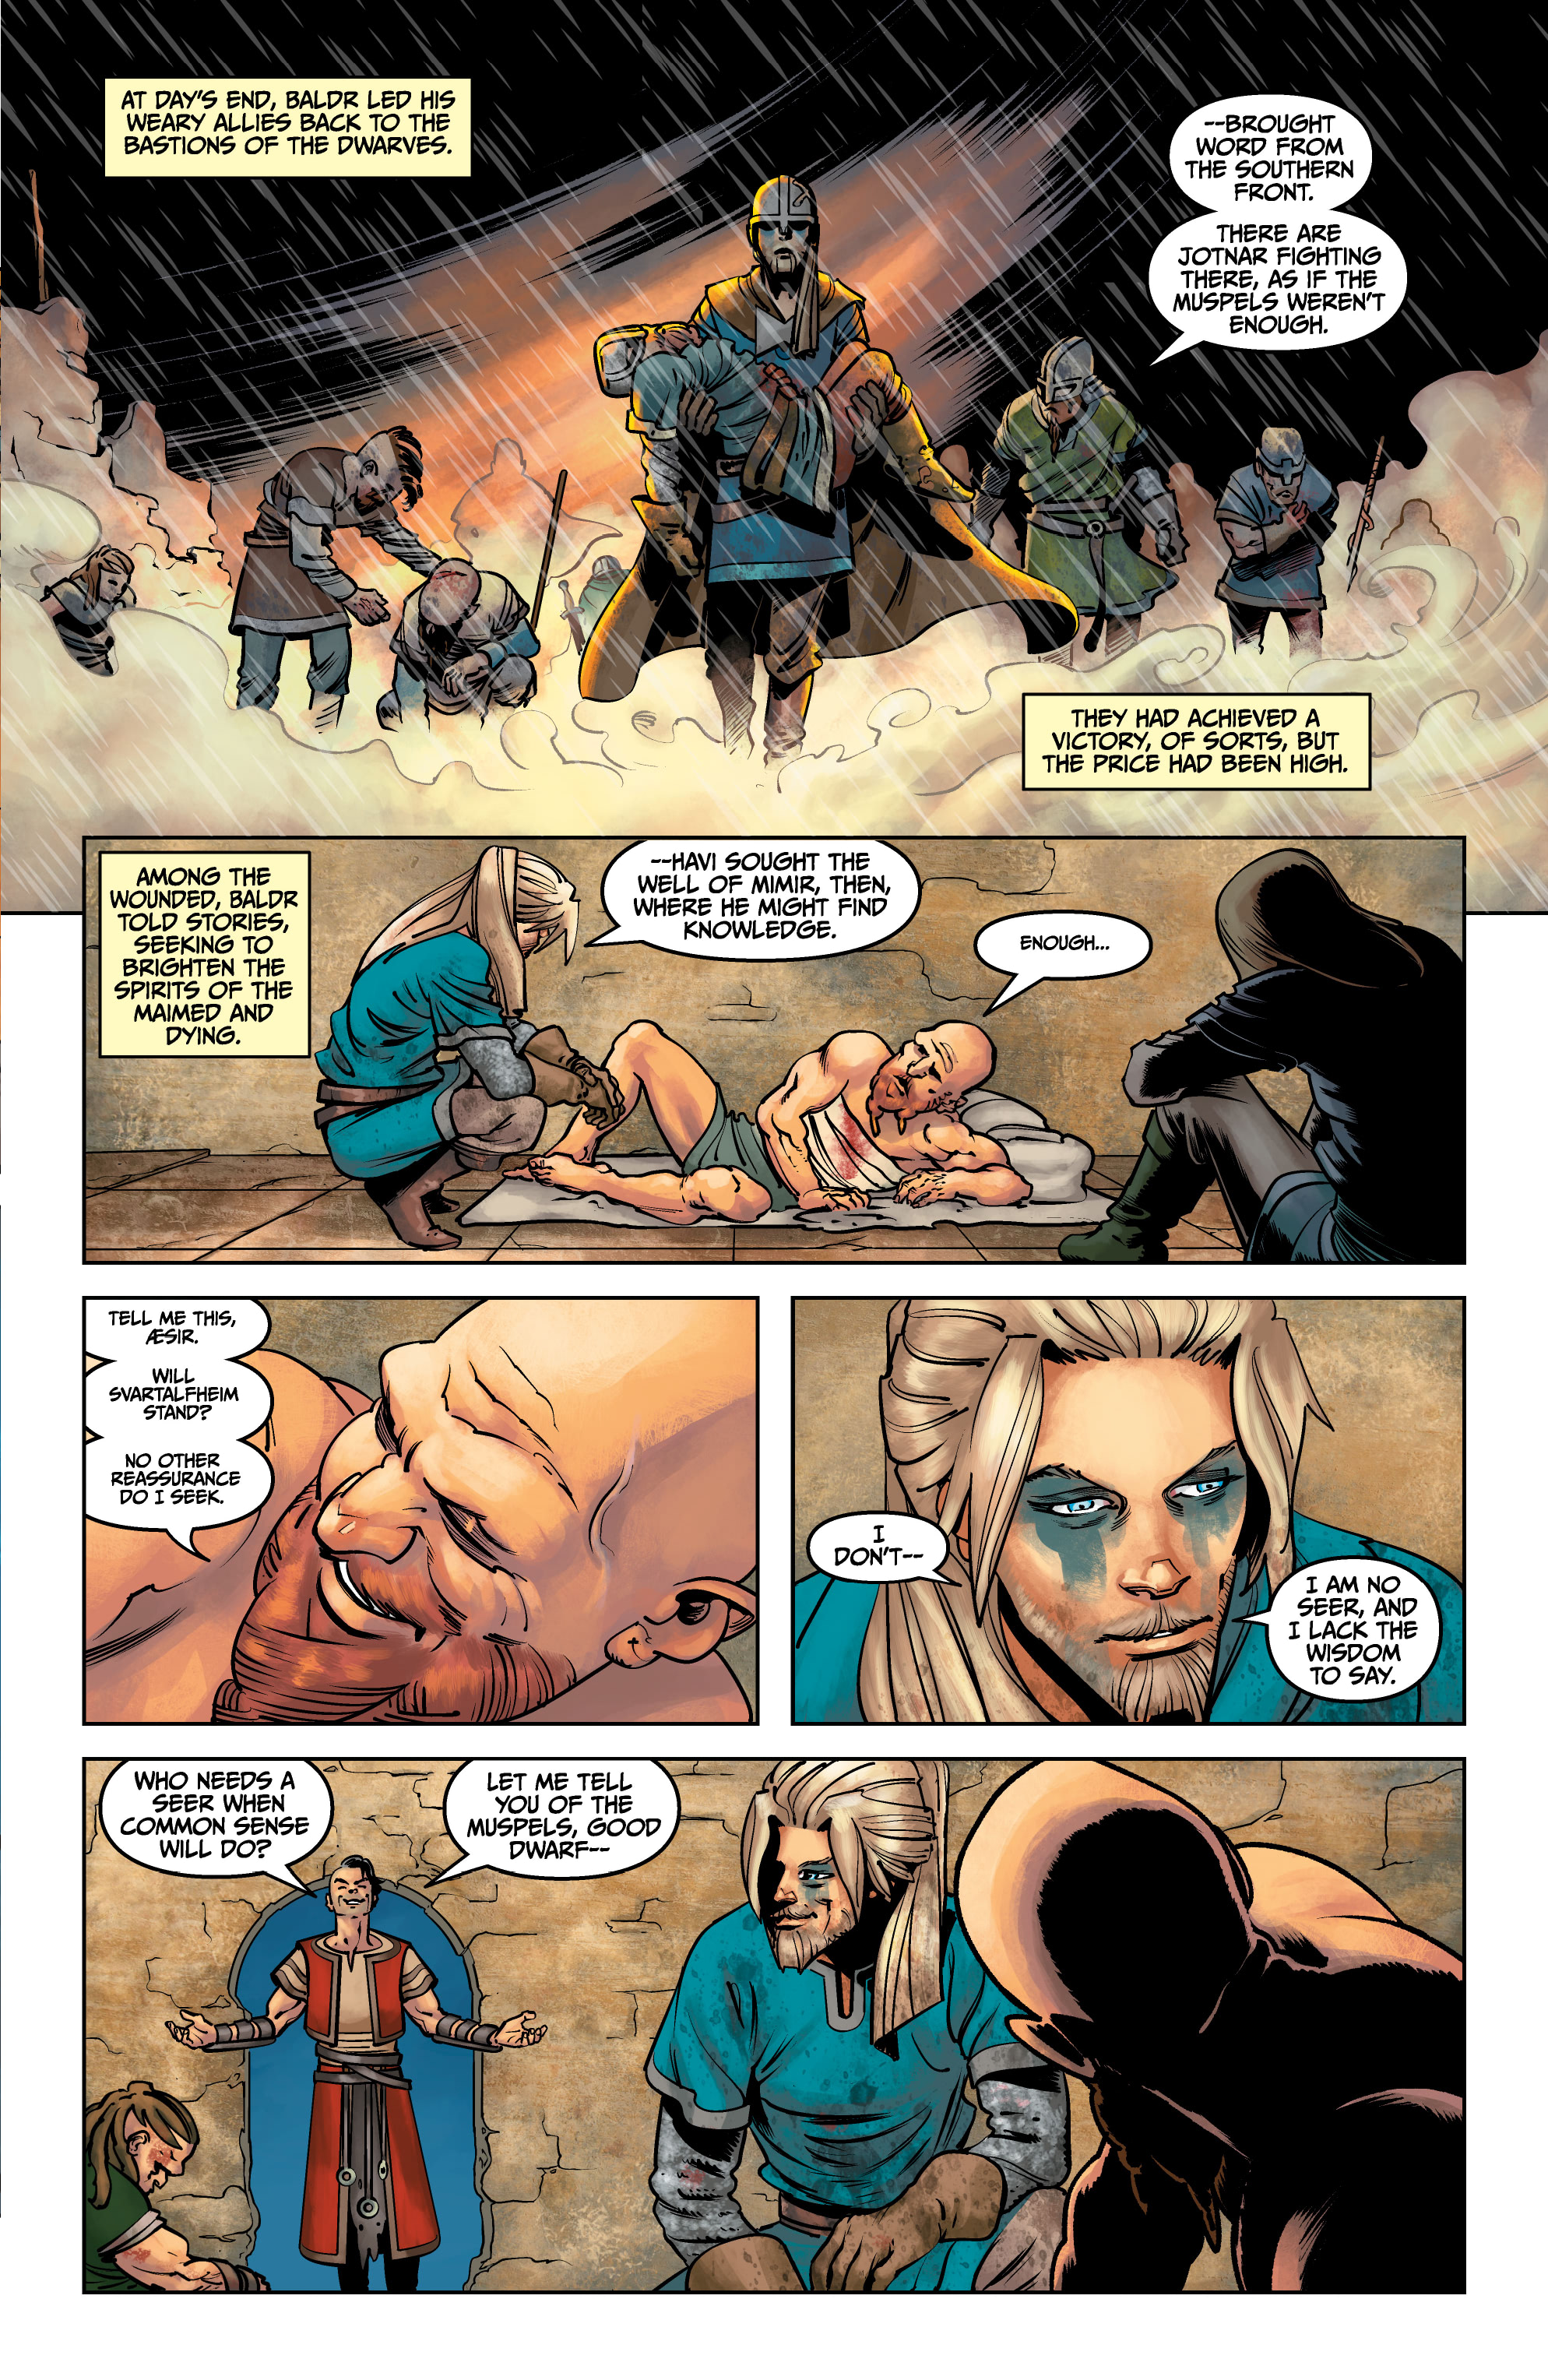 Assassin's Creed: Valhalla - Forgotten Myths (2022-): Chapter 3 - Page 5